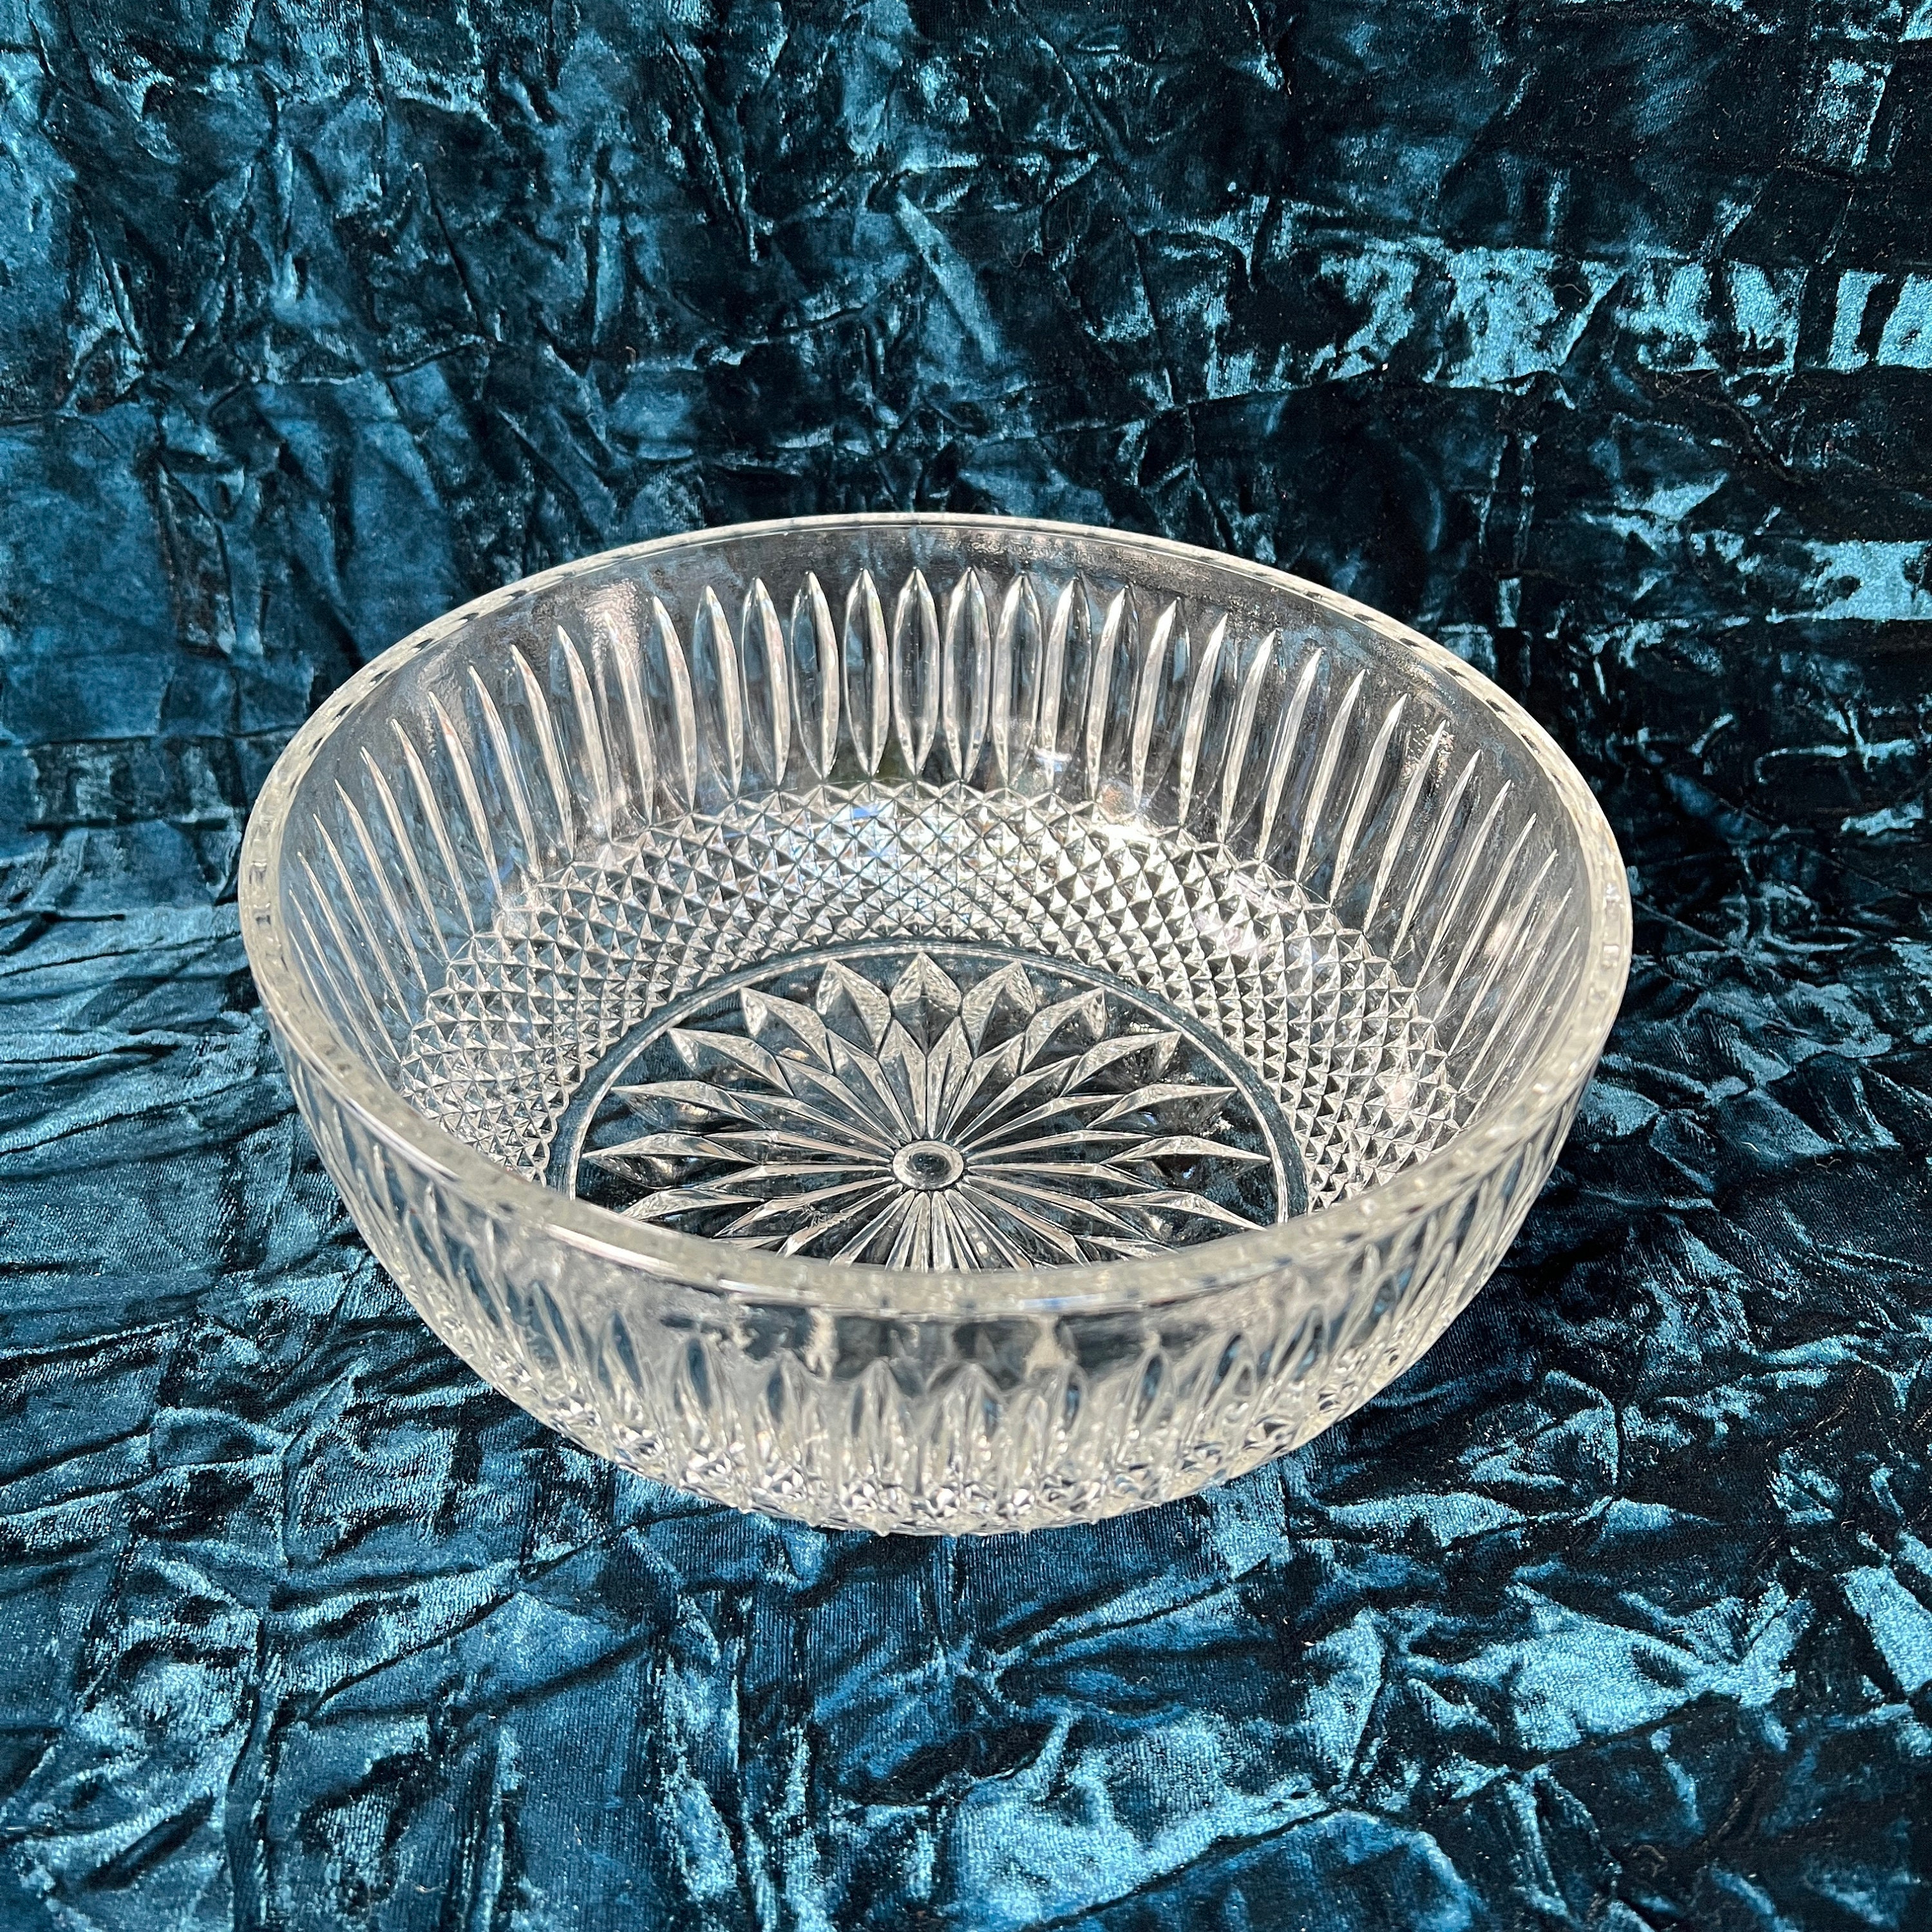 Vintage Salad Bowl Transparent Glass Kitchen Meal Tableware Utensil Service  France Round High Edge Home Art Table Flea Market Container 